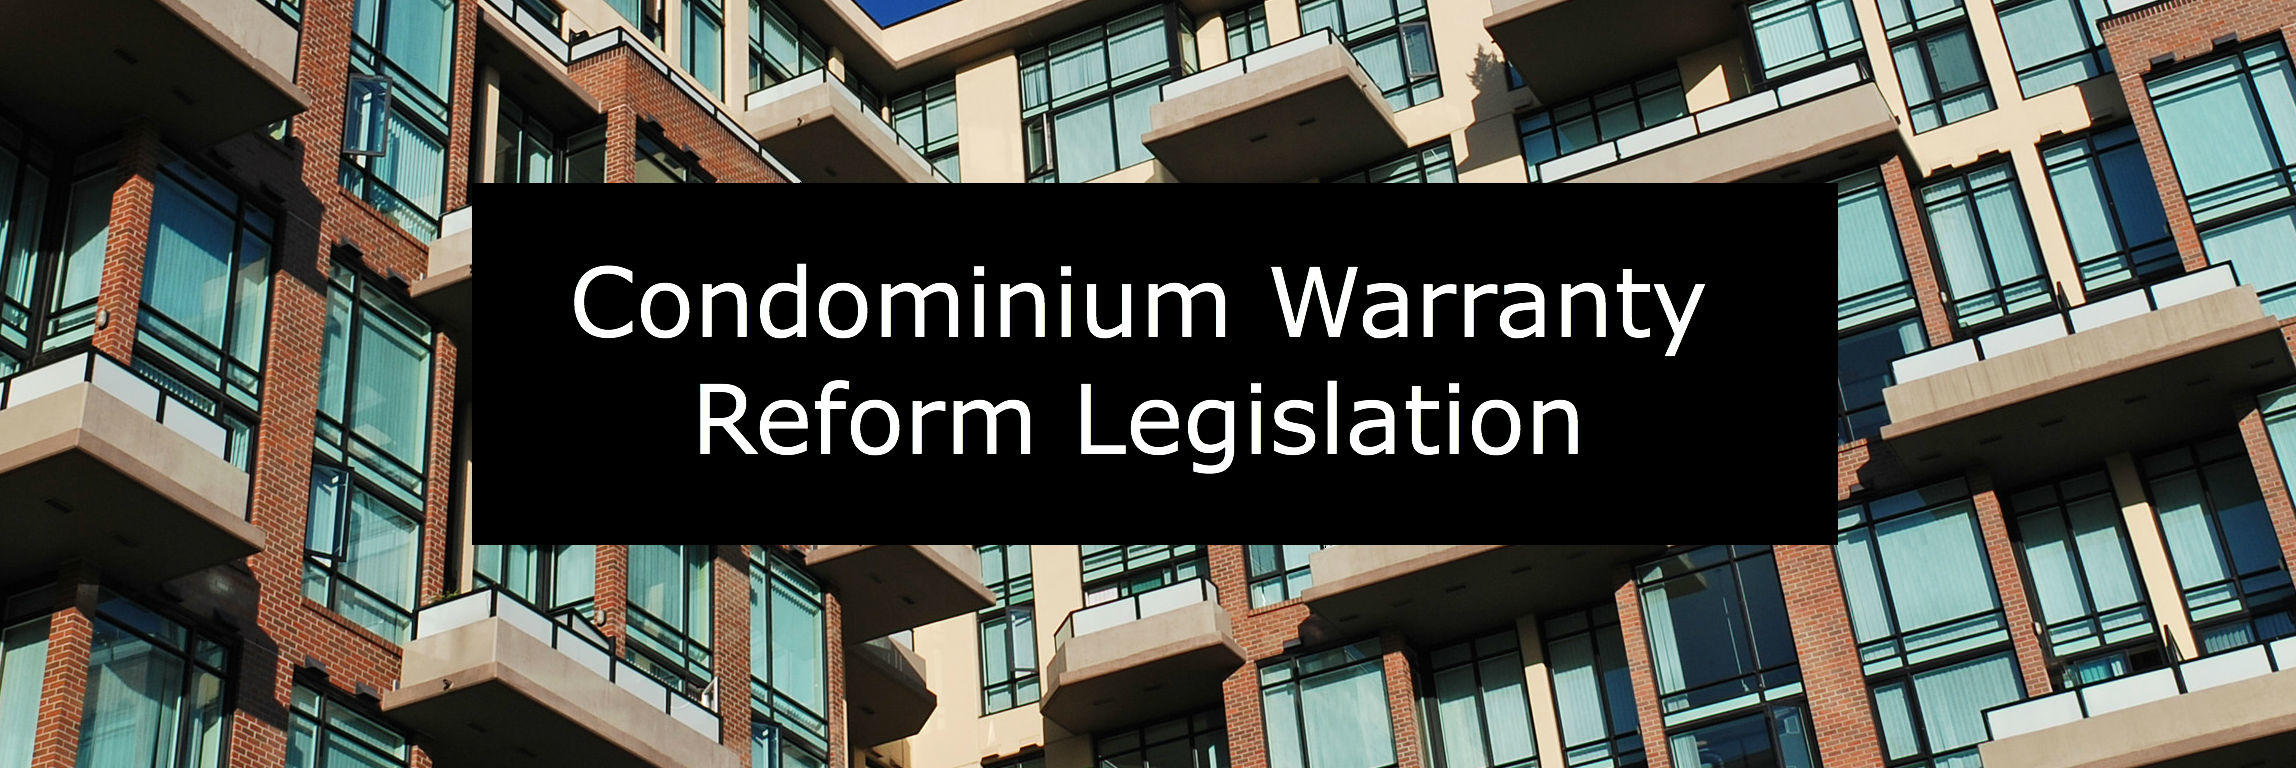 Condominium Warranty Reform Legislation Maryland needed to adress Unfair Practices used by Developers and Builders to avoid Warranty Responsibility for Construction Defects in Newly Constructed Condominiums 